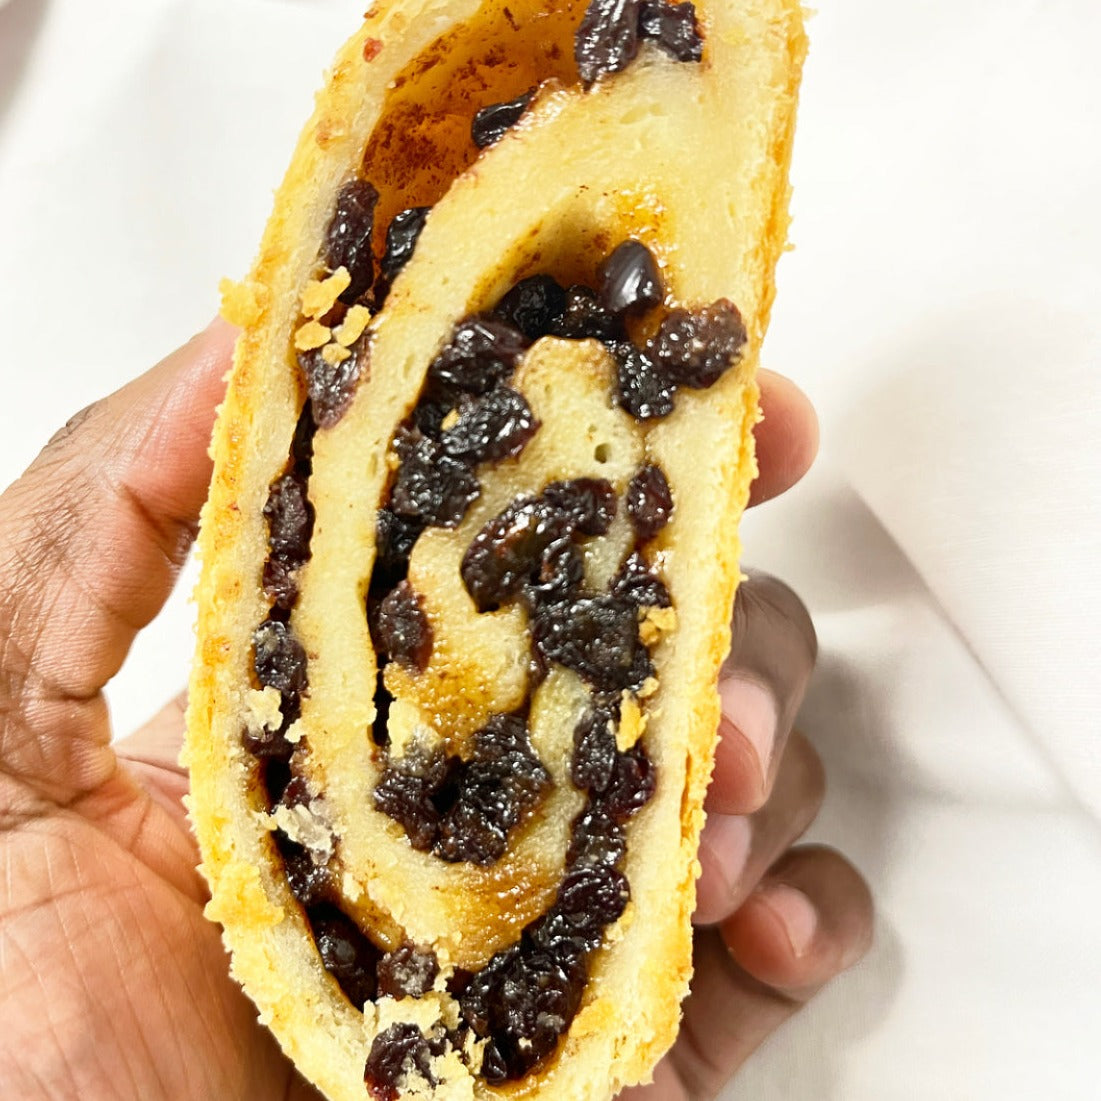 Close-up of Grenadian currant rolls